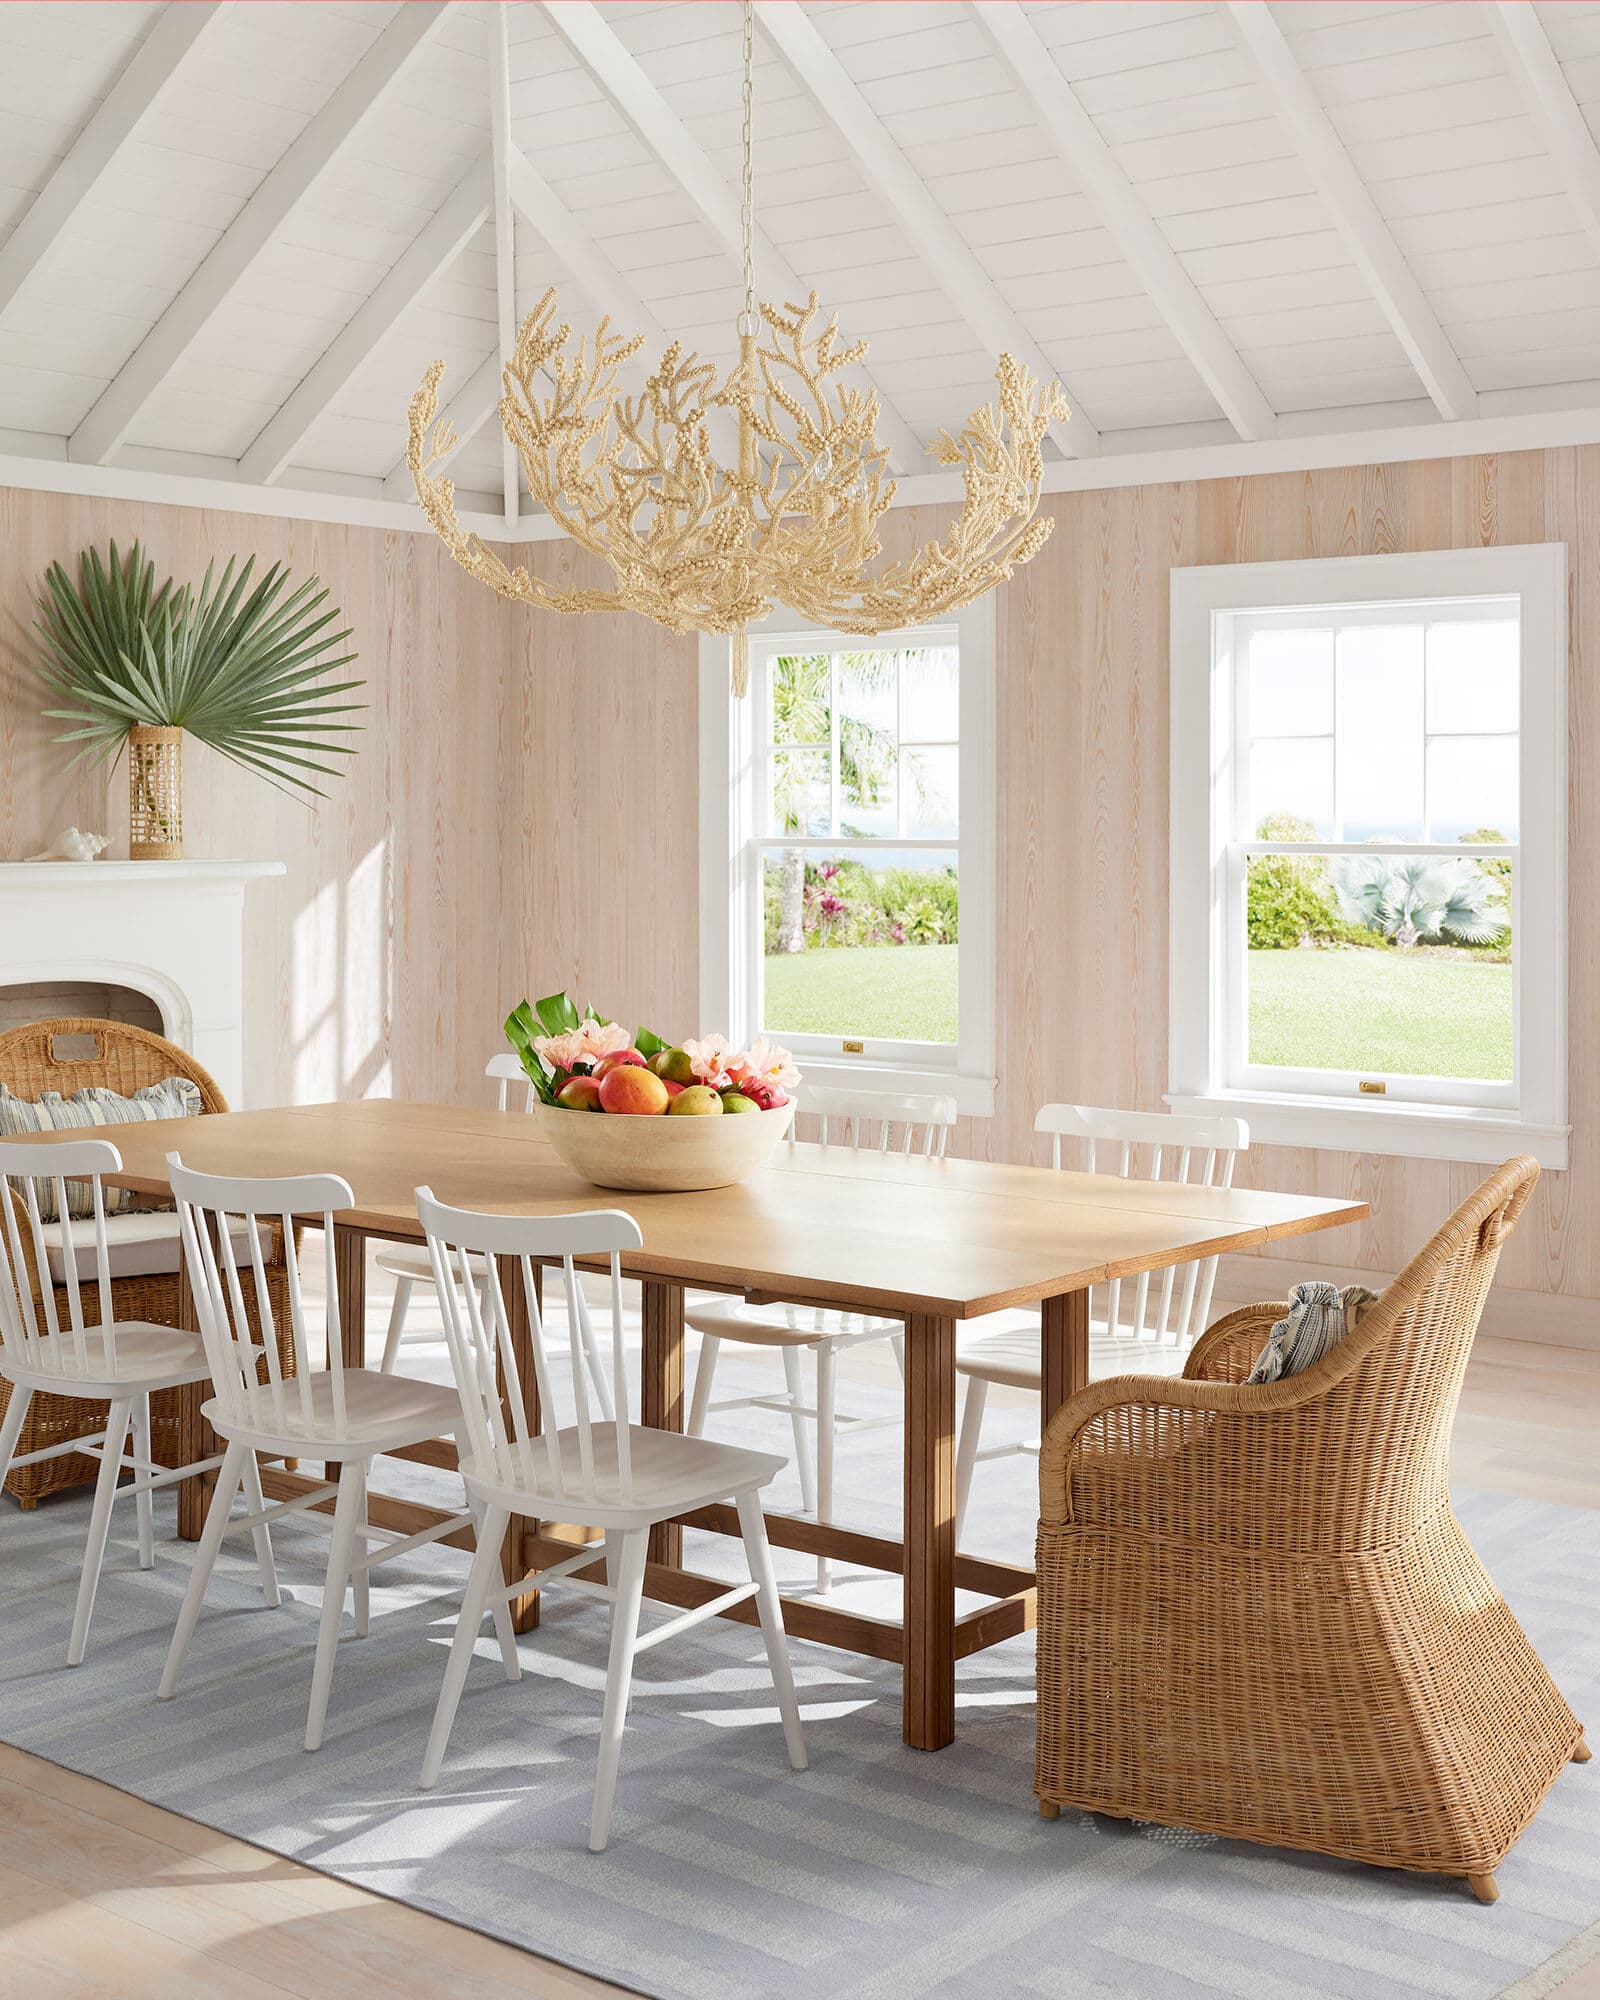 Go Coastal with a Coral Chandelier